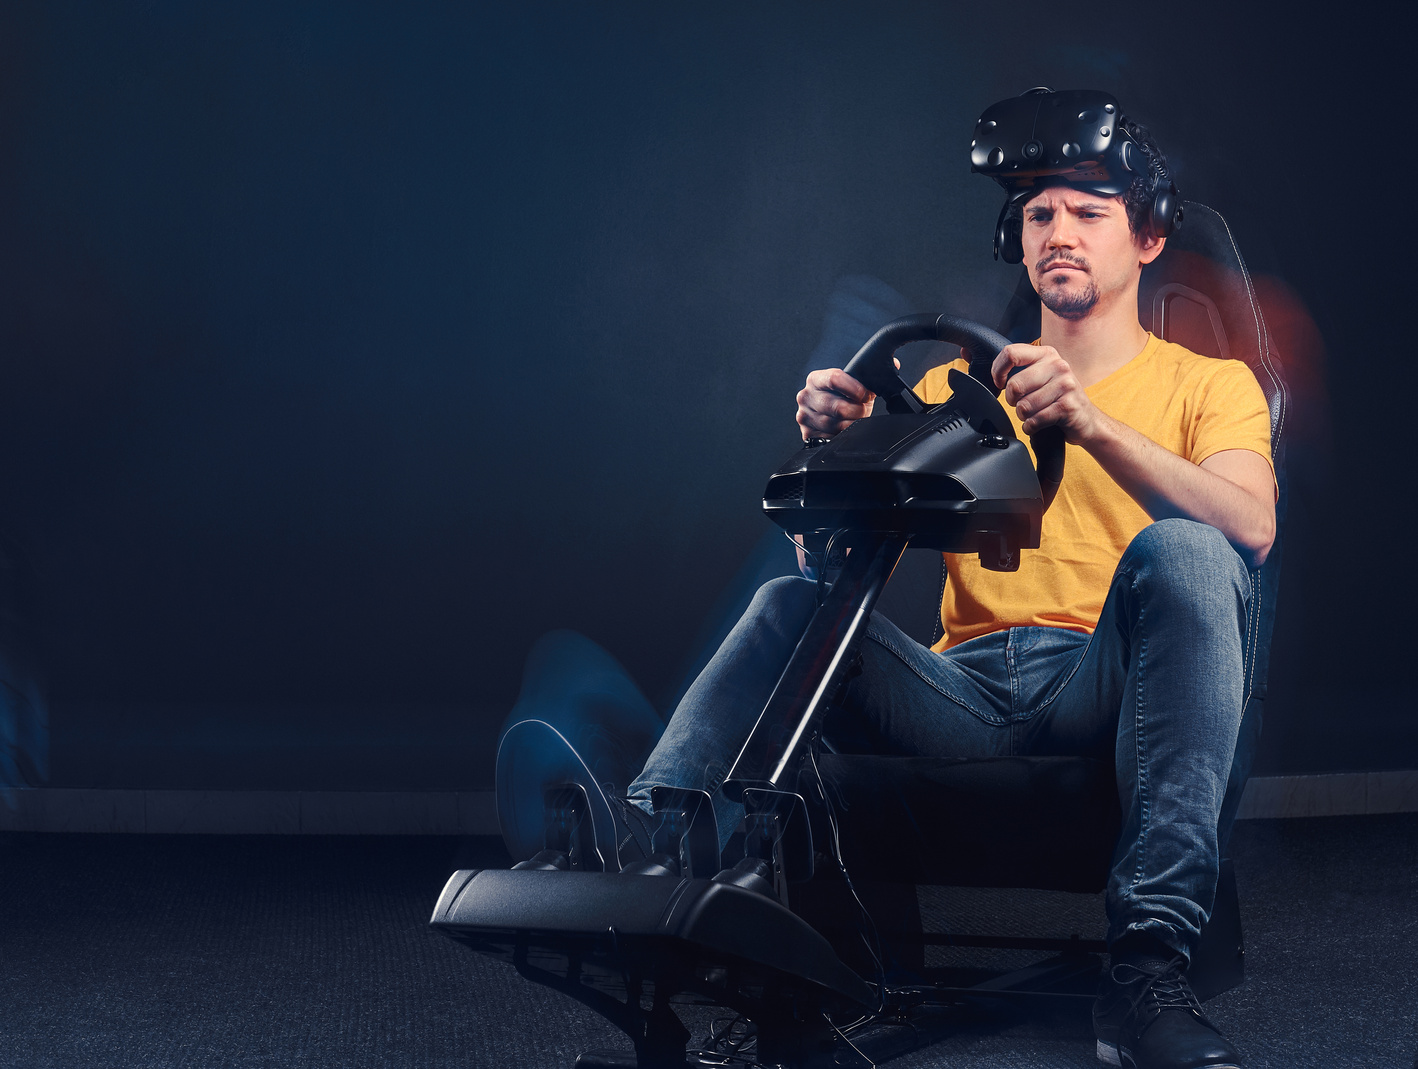 Man Wearing VR Headset Driving on Car Racing Simulator Cockpit with Seat and Wheel.